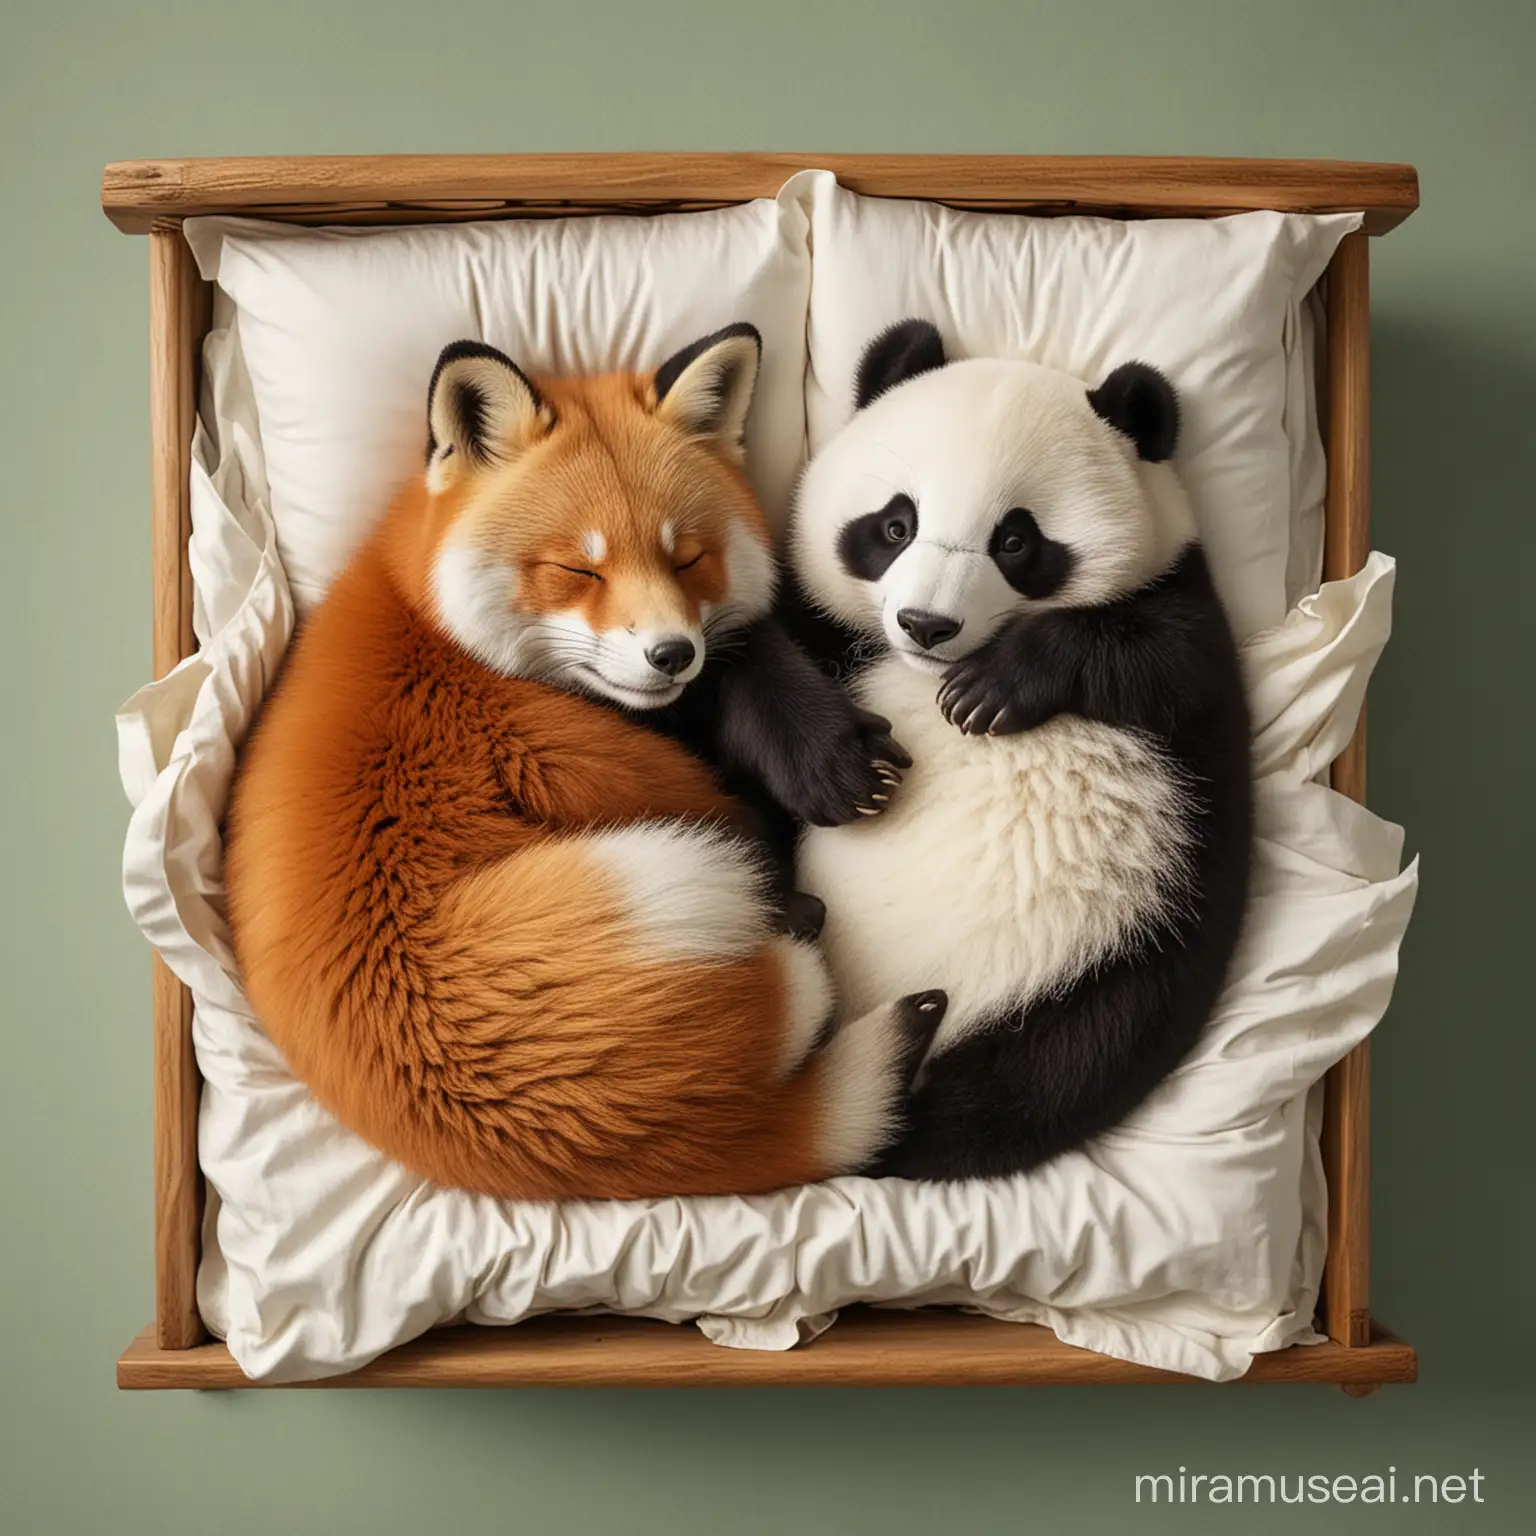 Cute Fox and Panda Sharing a Cozy Nap in Bed